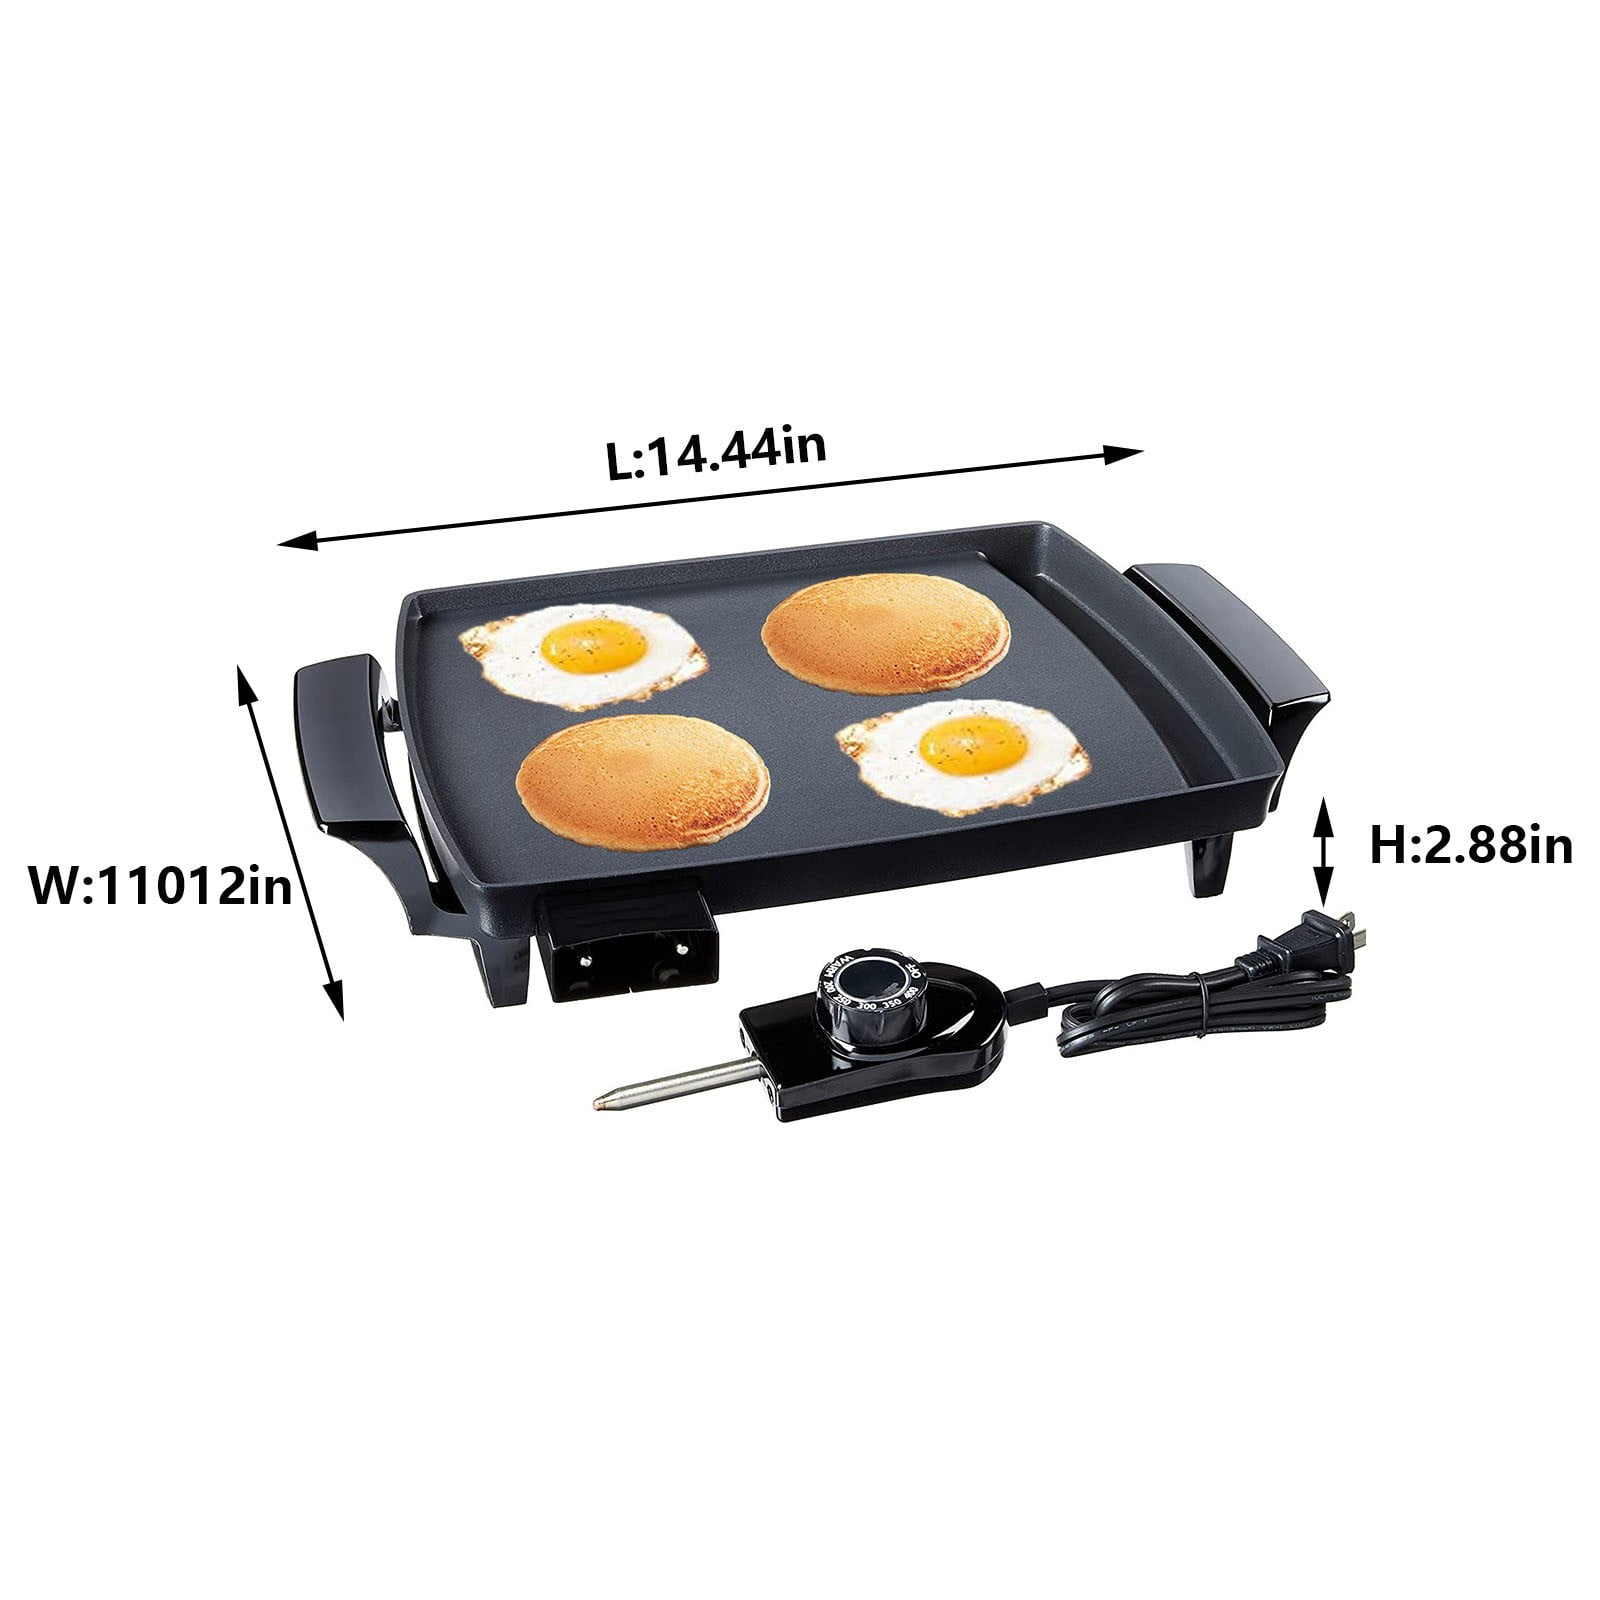 BELLA Electric Griddle with Warming Tray - Smokeless Indoor Grill